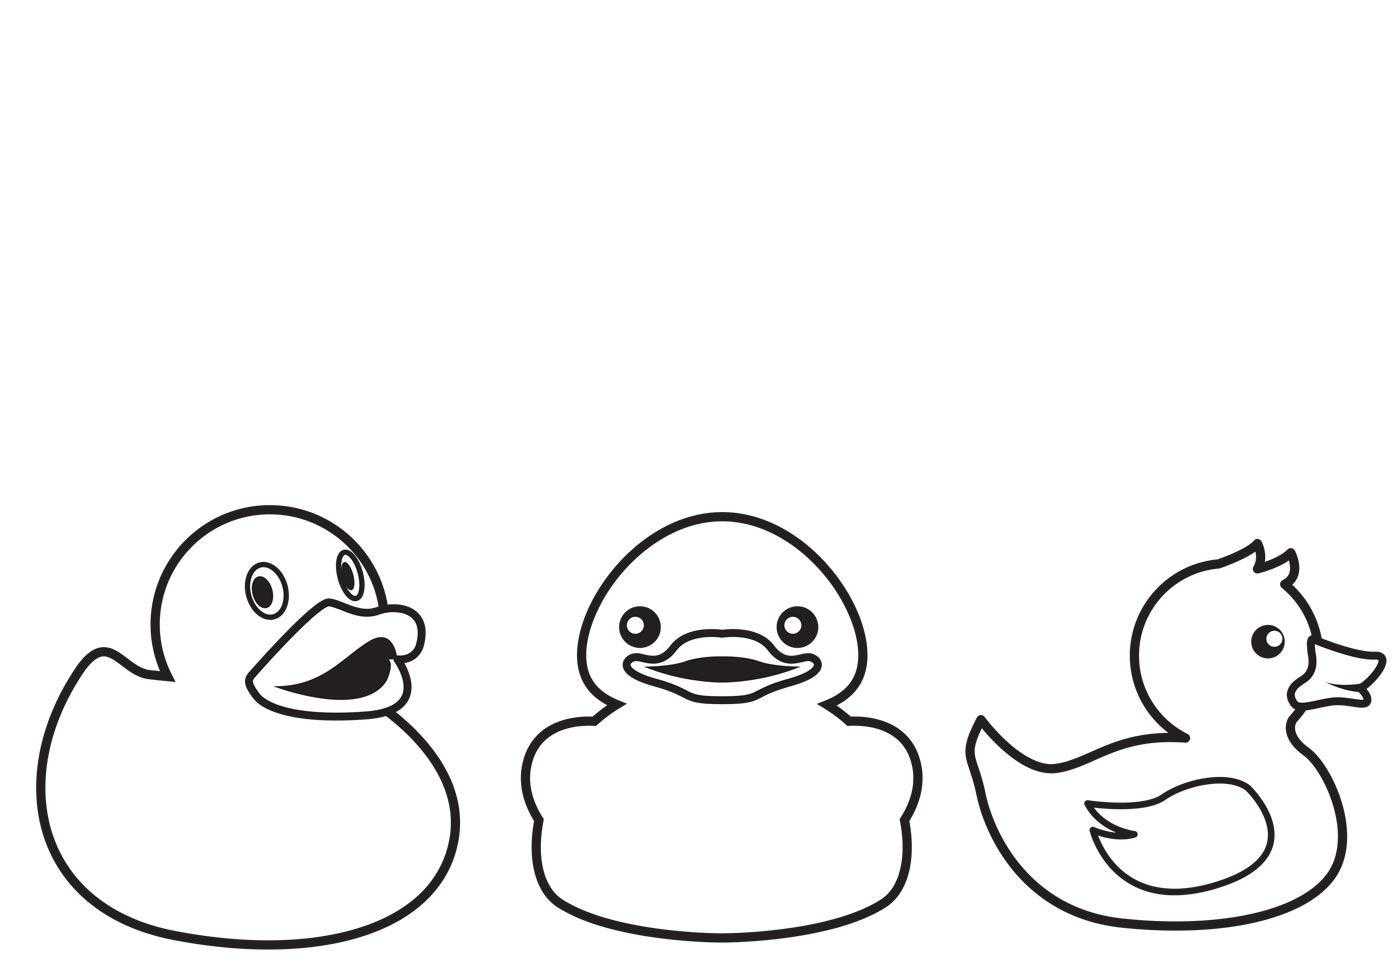 Coloring Three ducks. Category The contours for cutting out the birds. Tags:  duck.